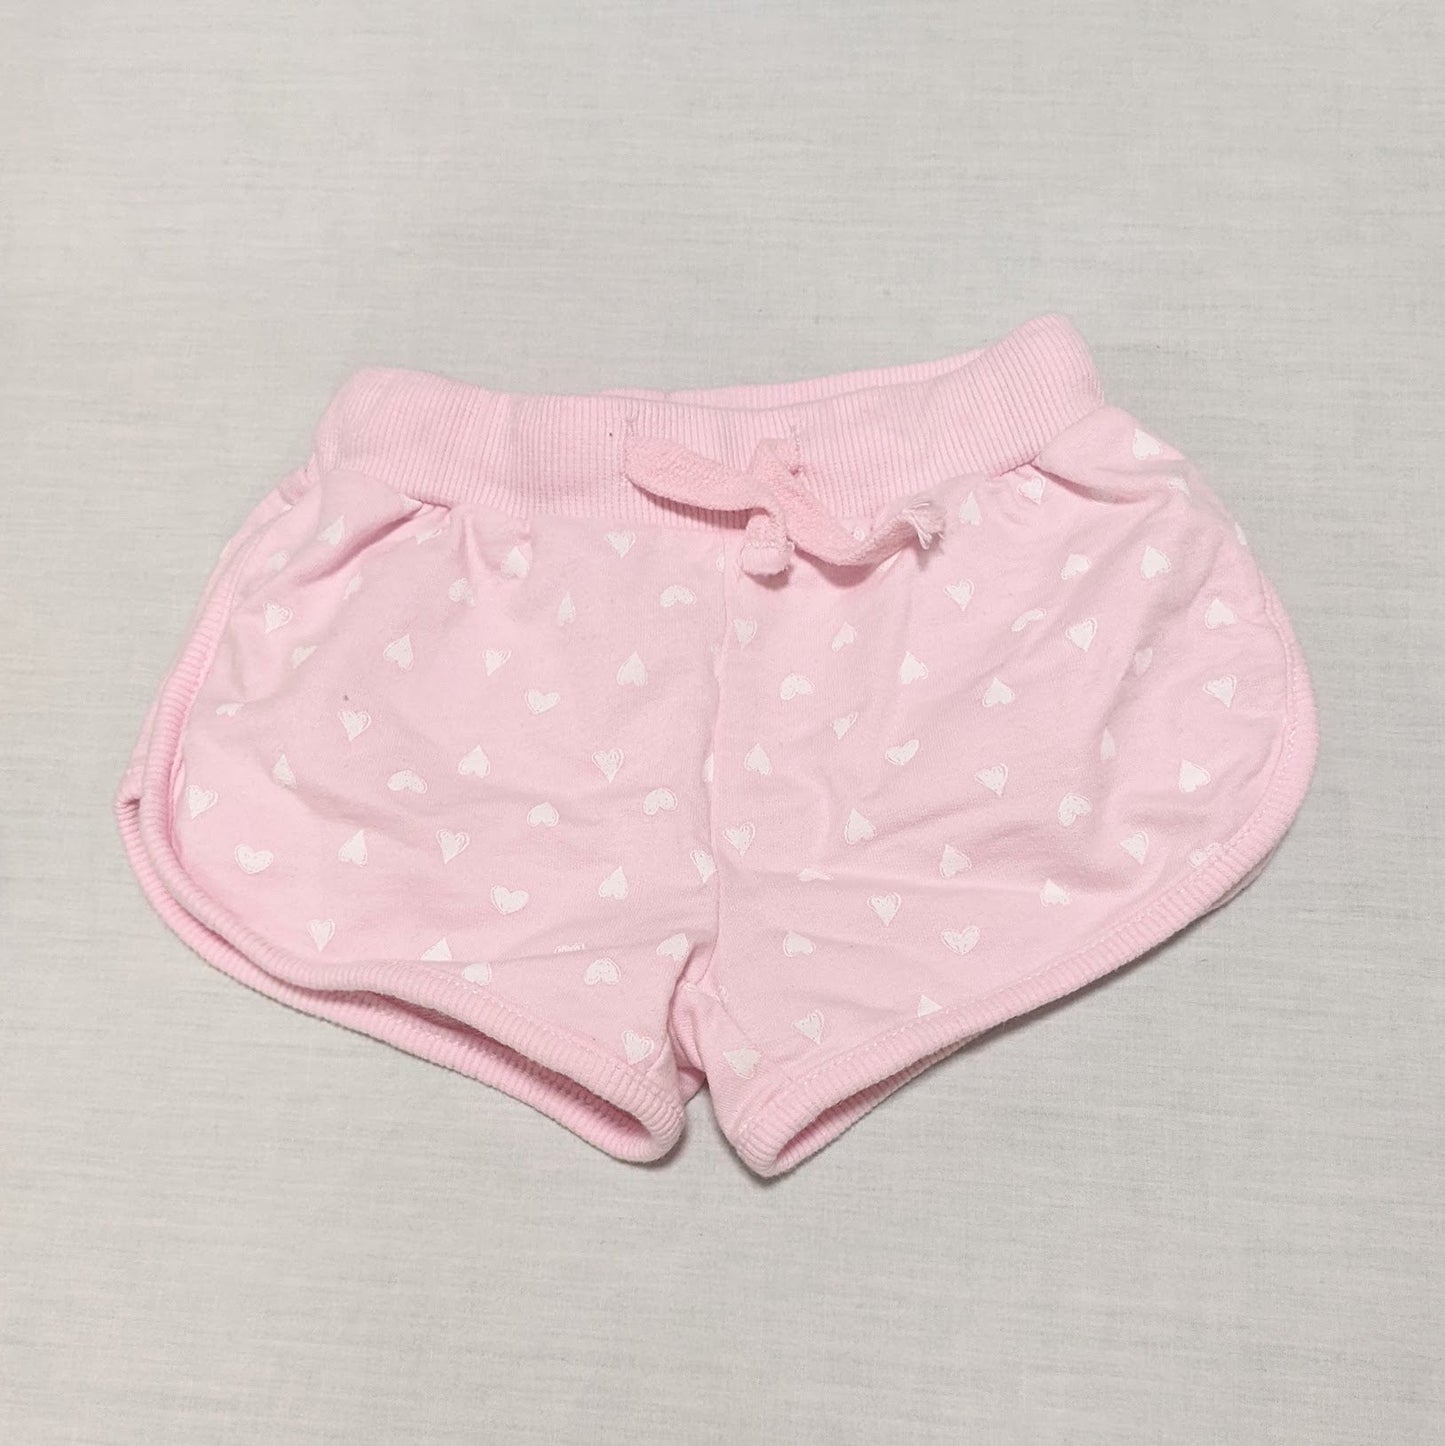 Pink & white heart shorts - size 000